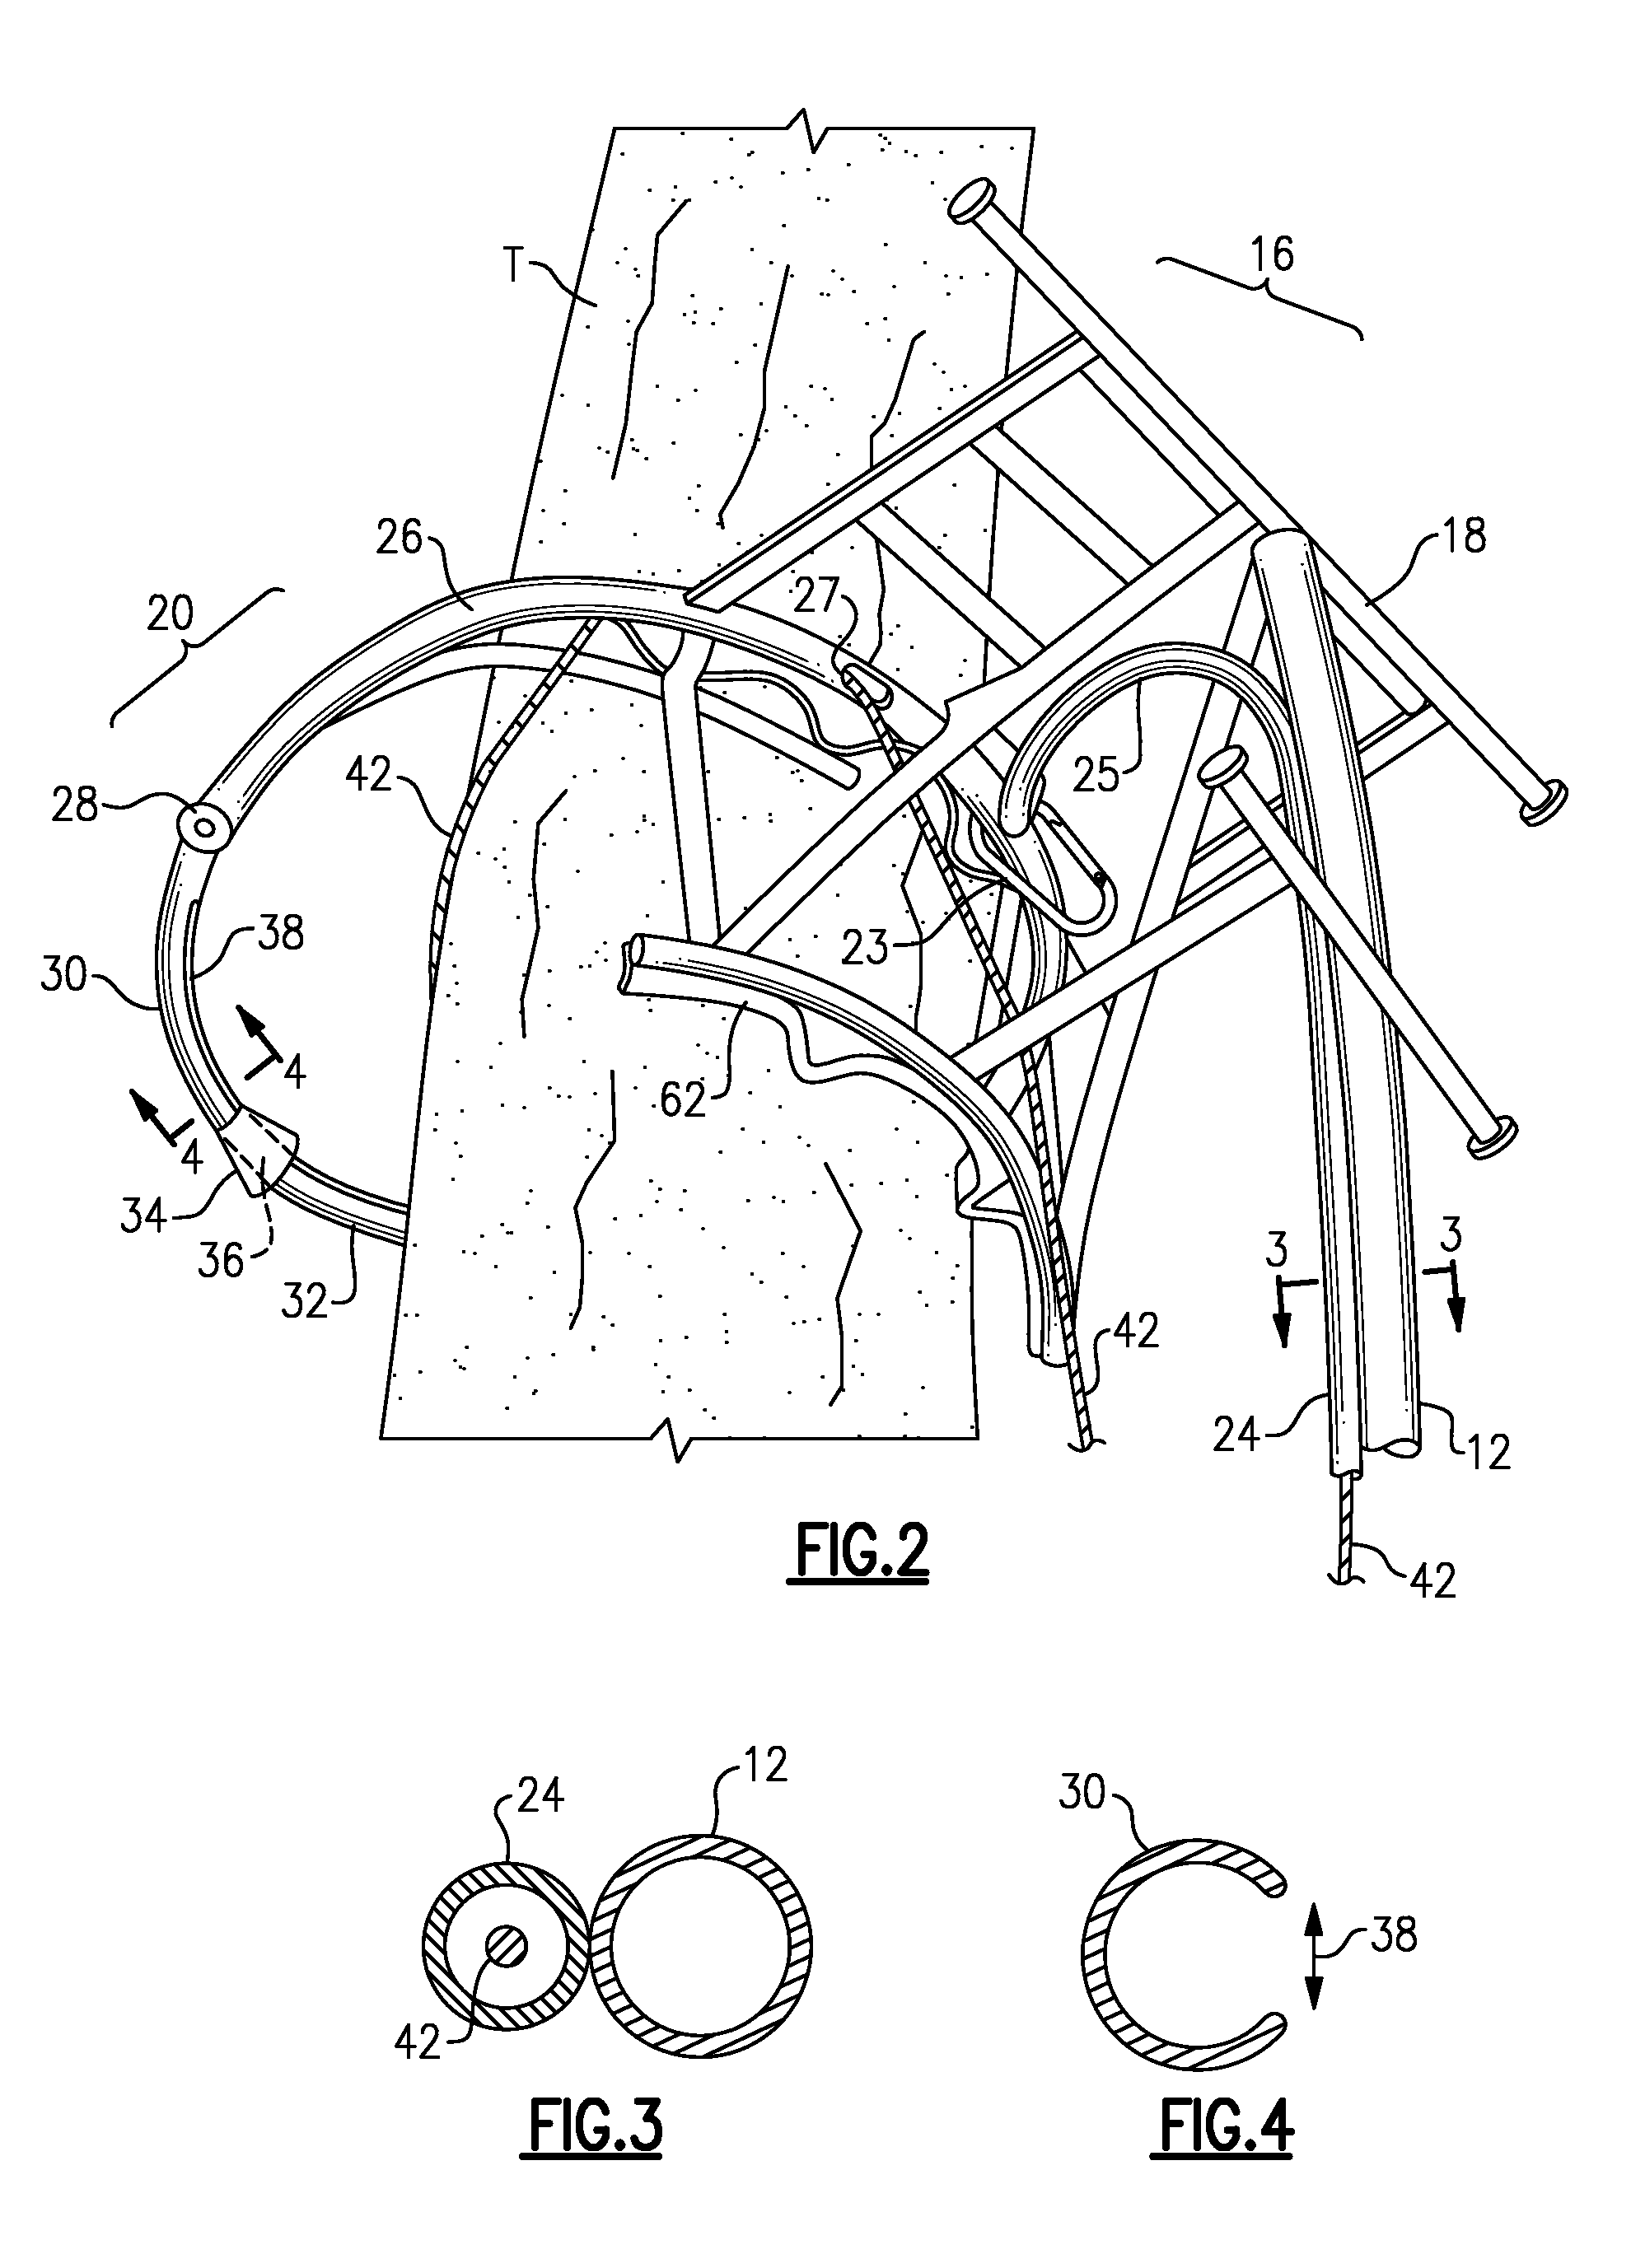 Suspended Anchored Climbing Device with Safety Features